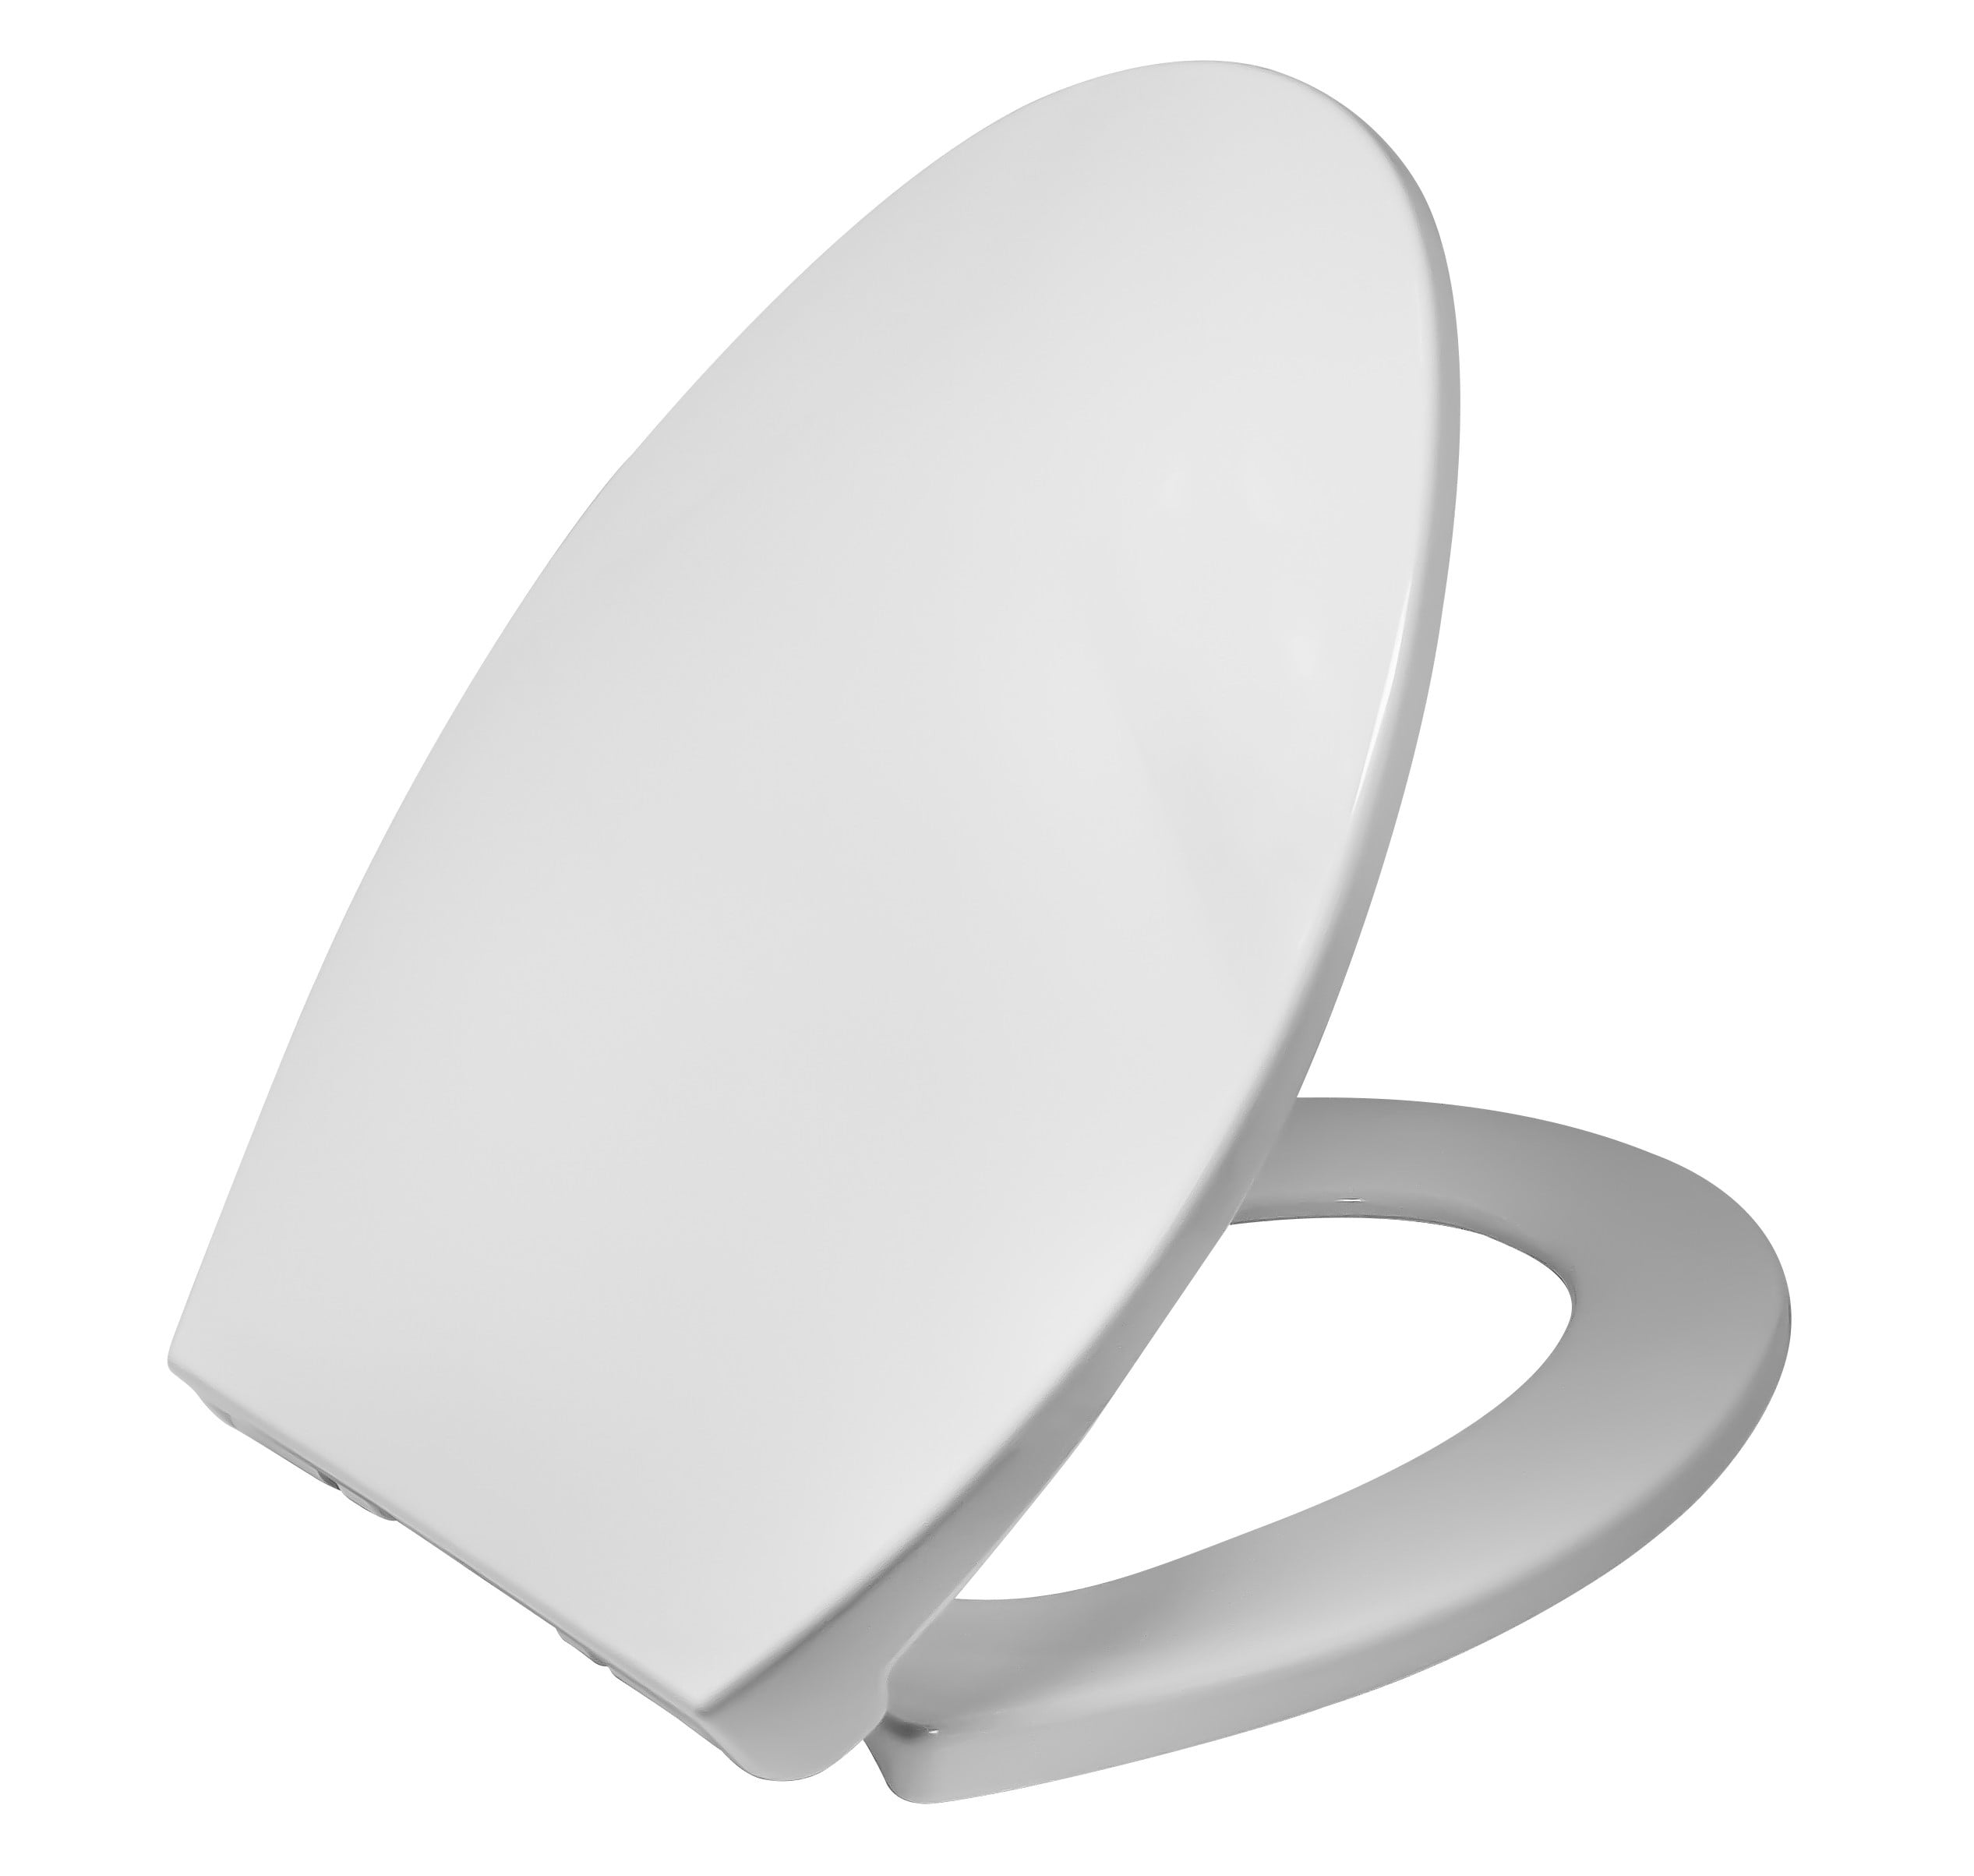 Winfield Heavy Duty Toilet Seat Elongated Quick Close Easy Install & Clean 